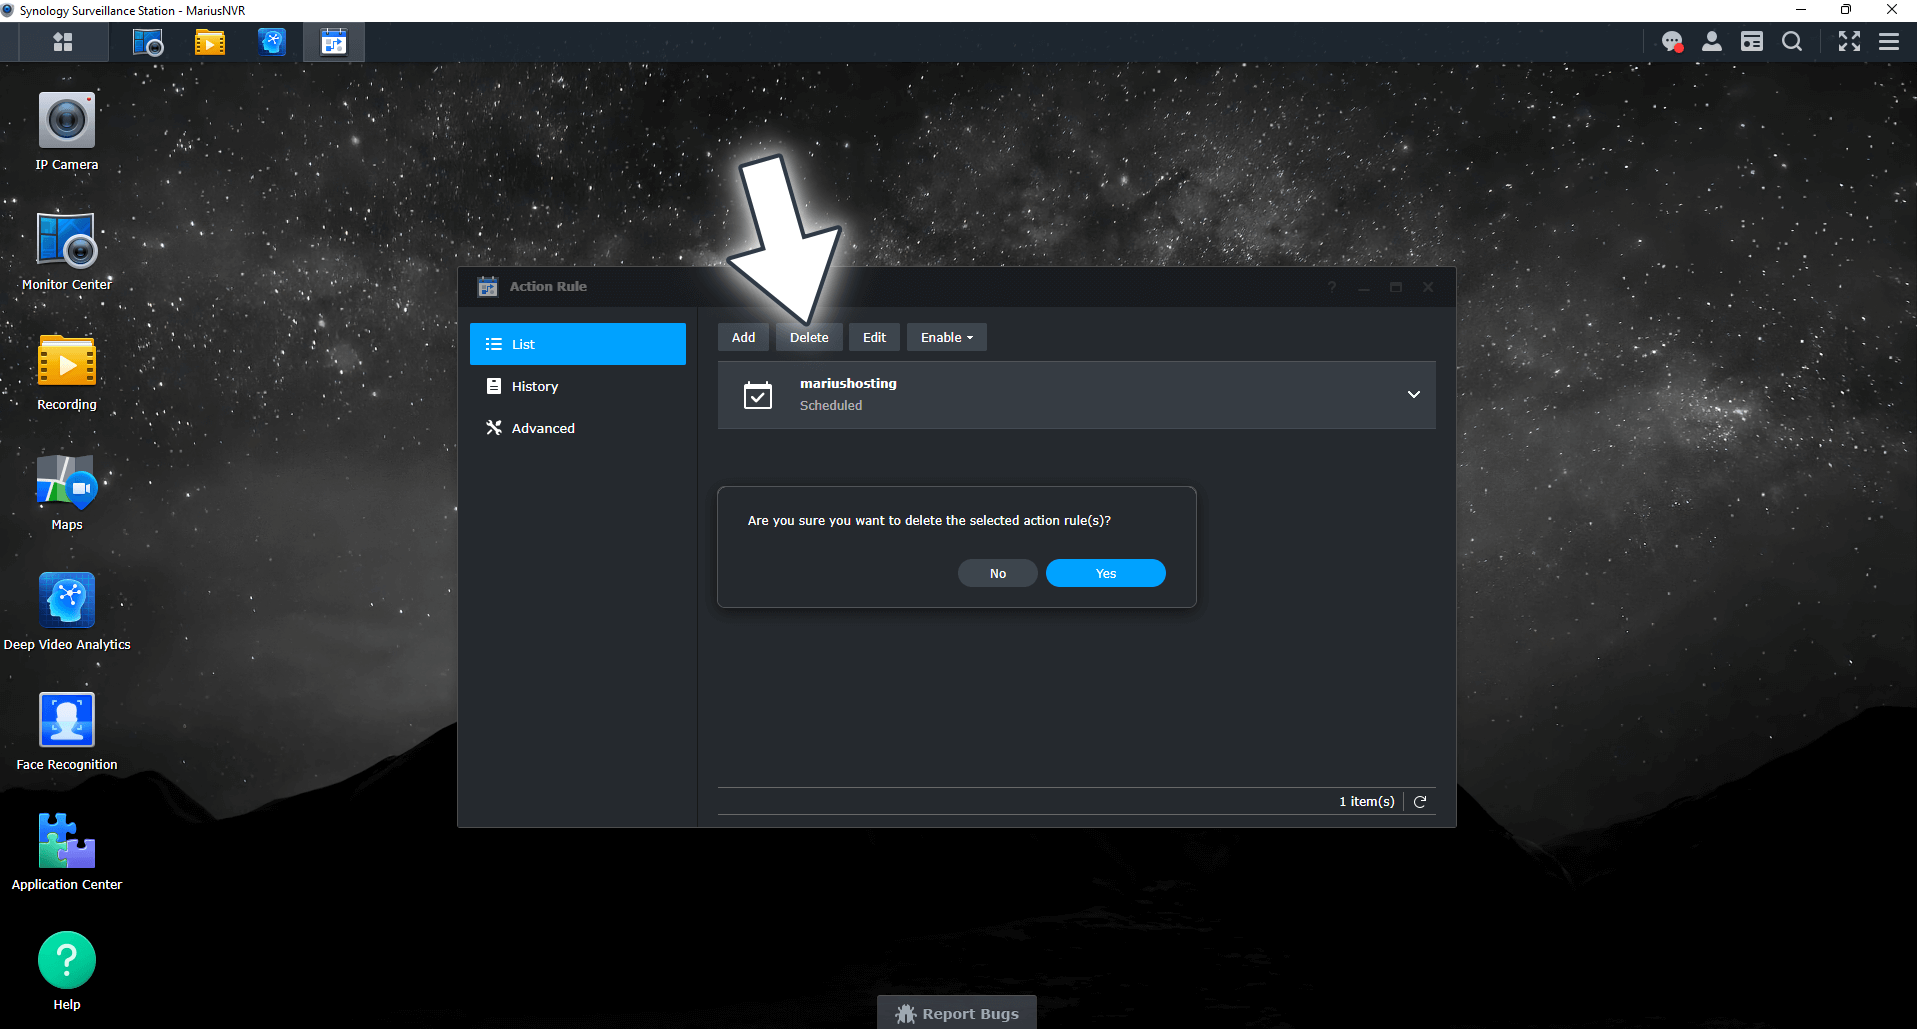 Synology Add Action Rule in Surveillance Station Step 7